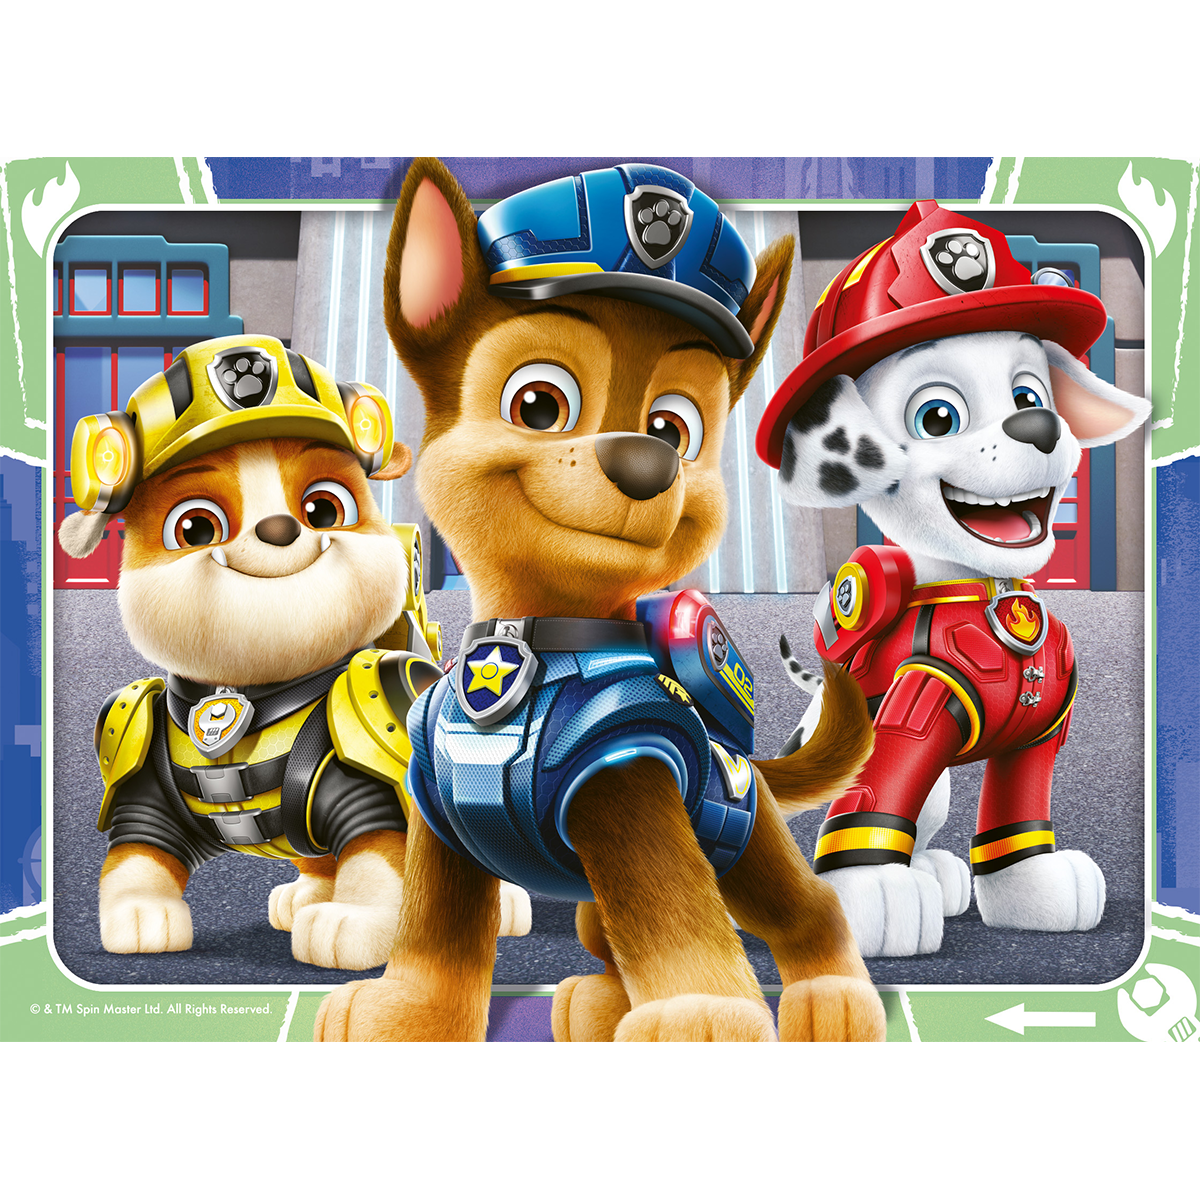 Ravensburger puzzle 4 in a box - paw patrol movie - RAVENSBURGER, Paw Patrol